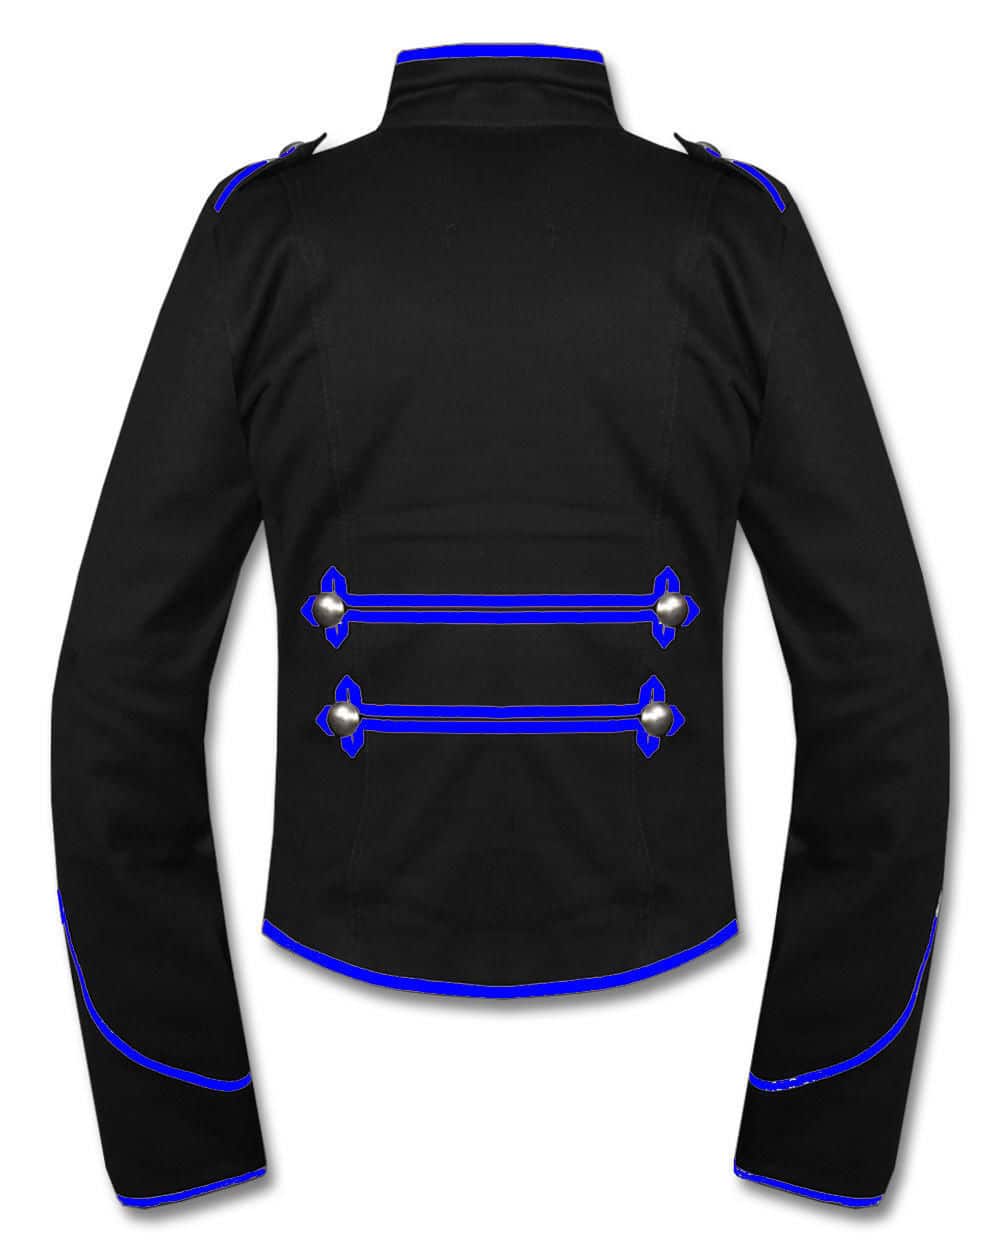 Military Marching Band Drummer Jacket, Traditional Jackets, Jackets for Men, Best Traditional Jackets